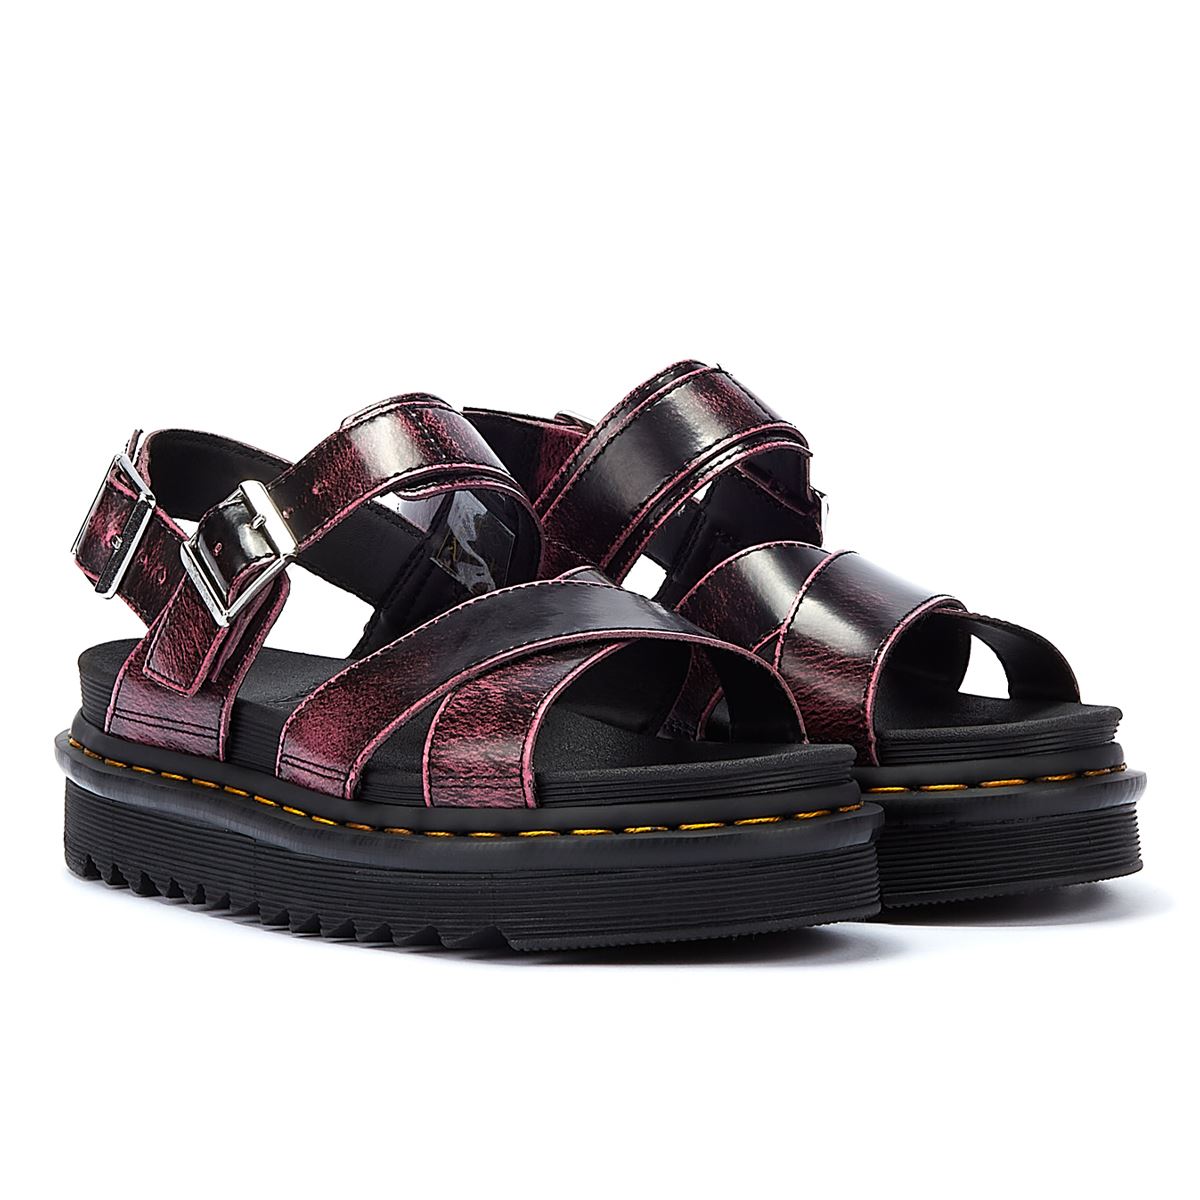 Dr. Martens Voss Ii Two Tone Rub Off Women’s Black/Pink Sandals